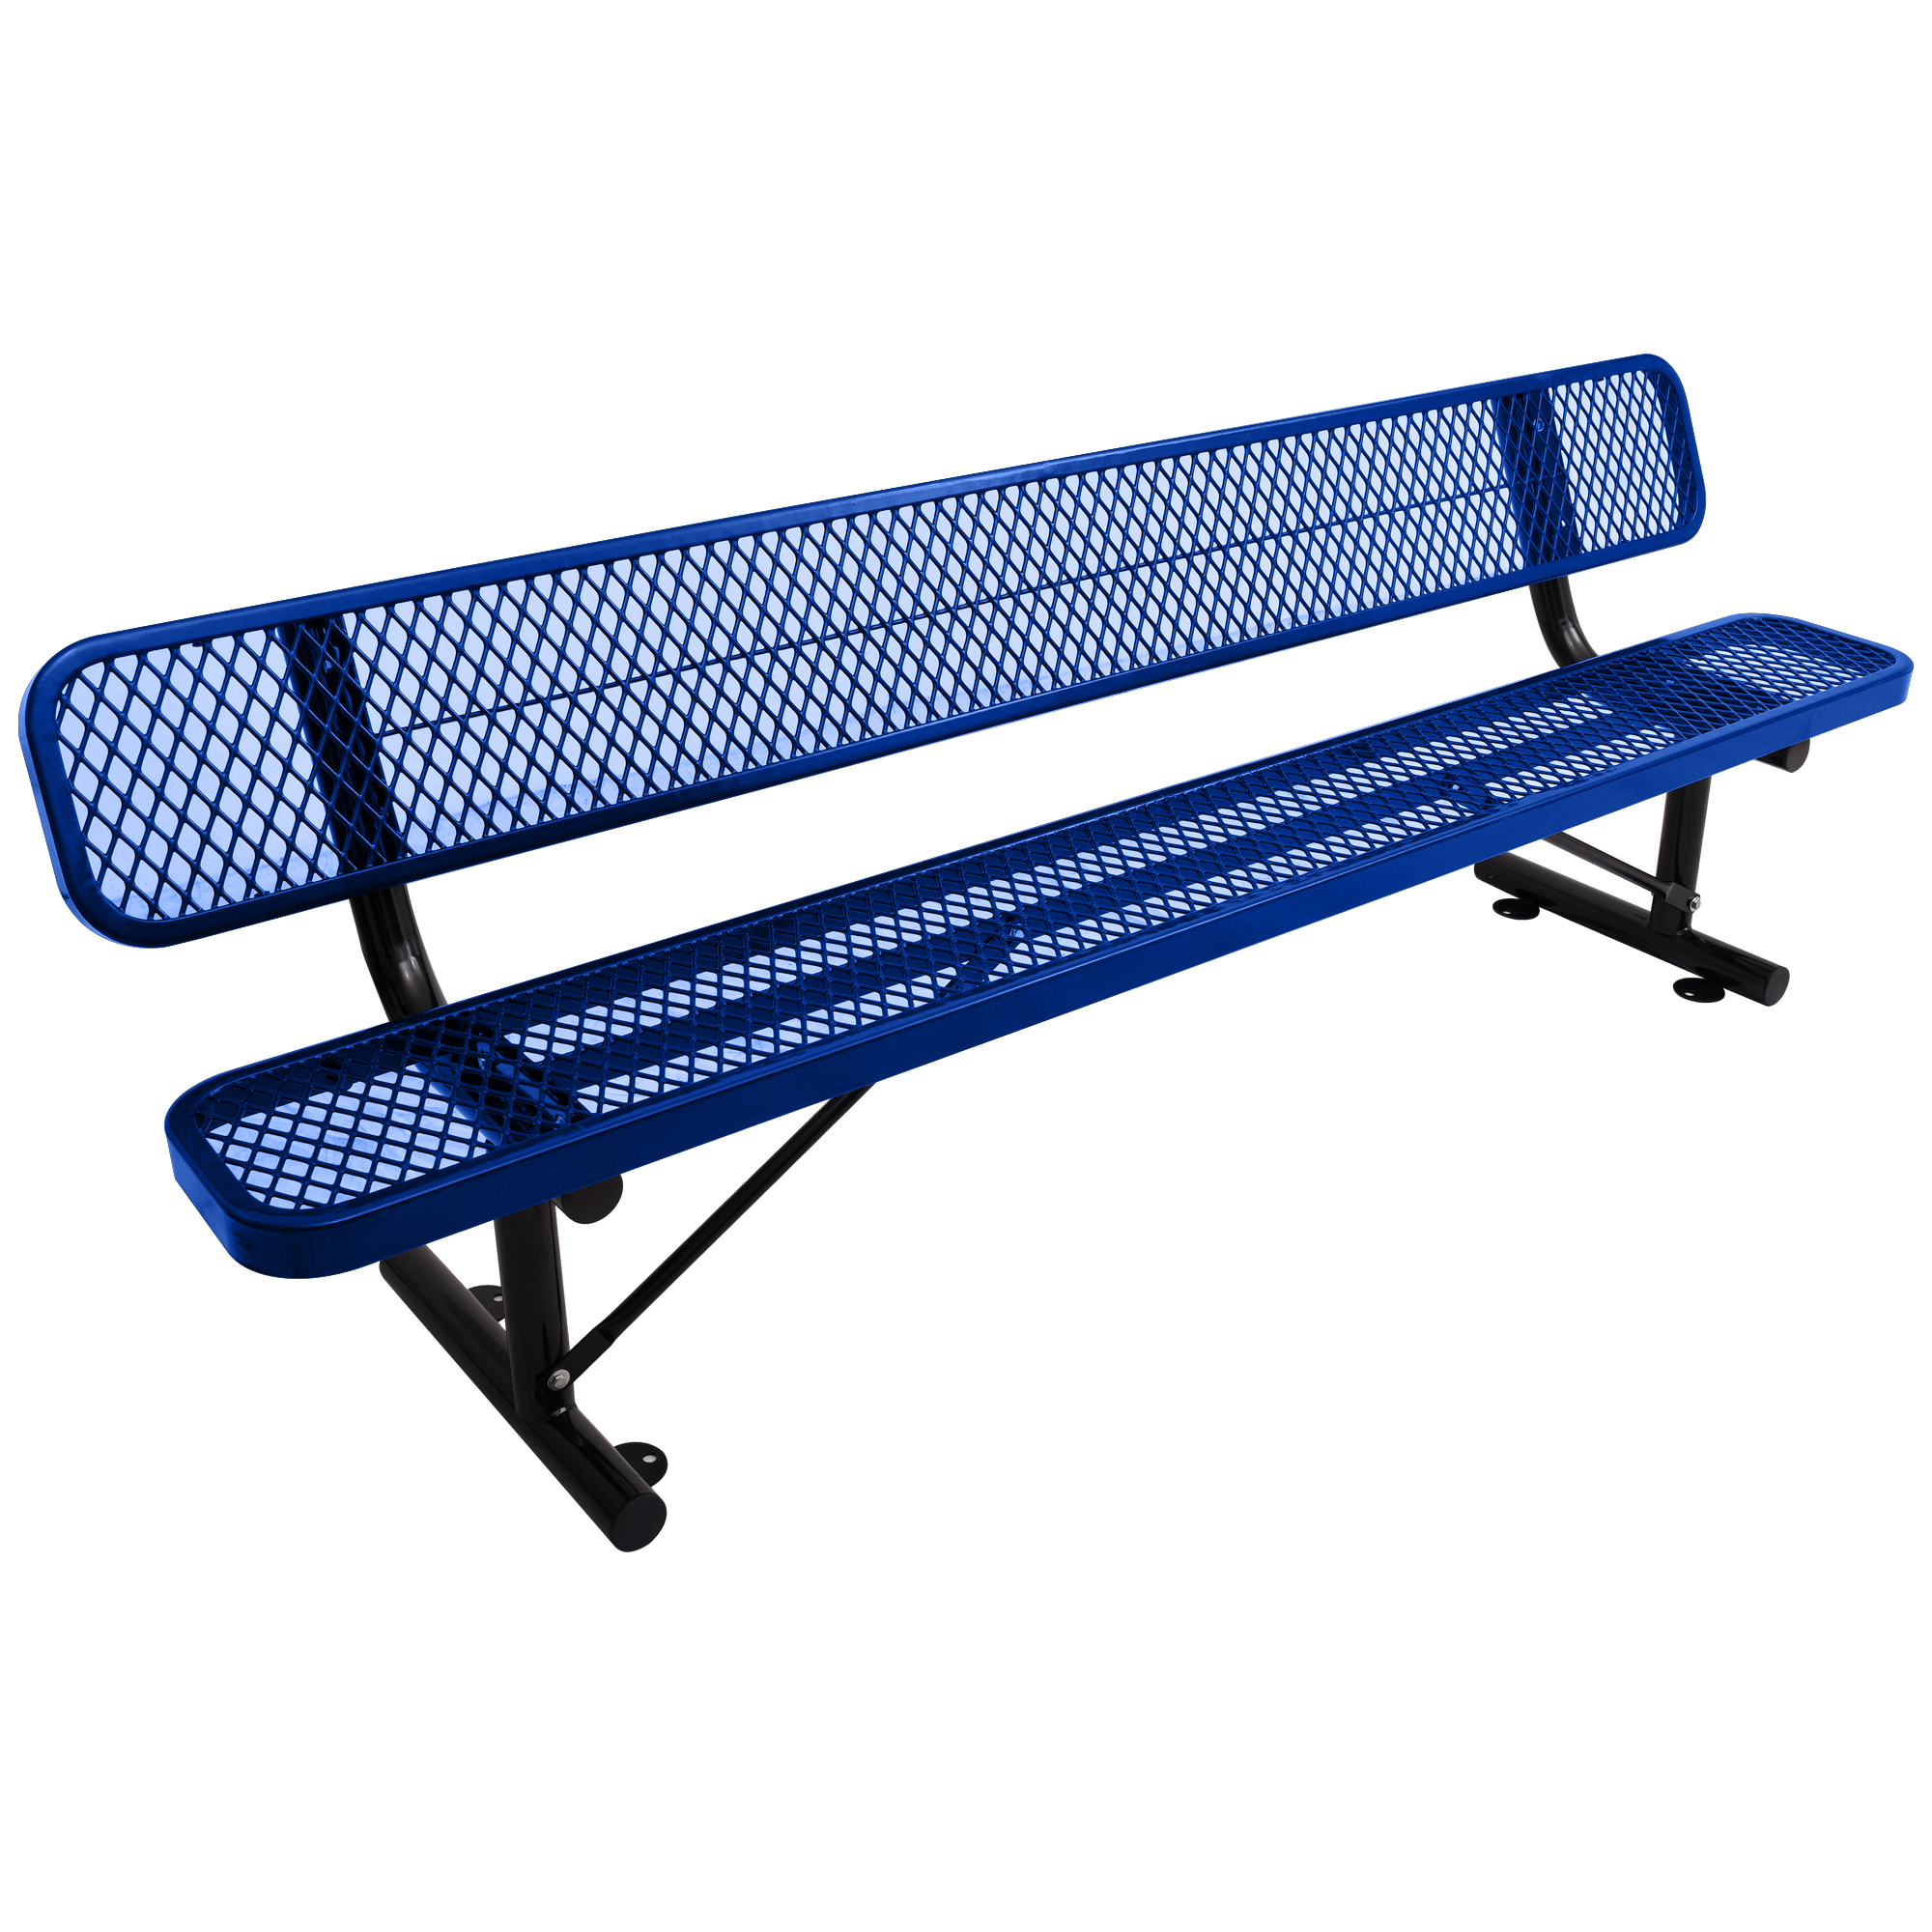 8 ft. Outdoor Steel Bench with Backrest BLue-Boyel Living